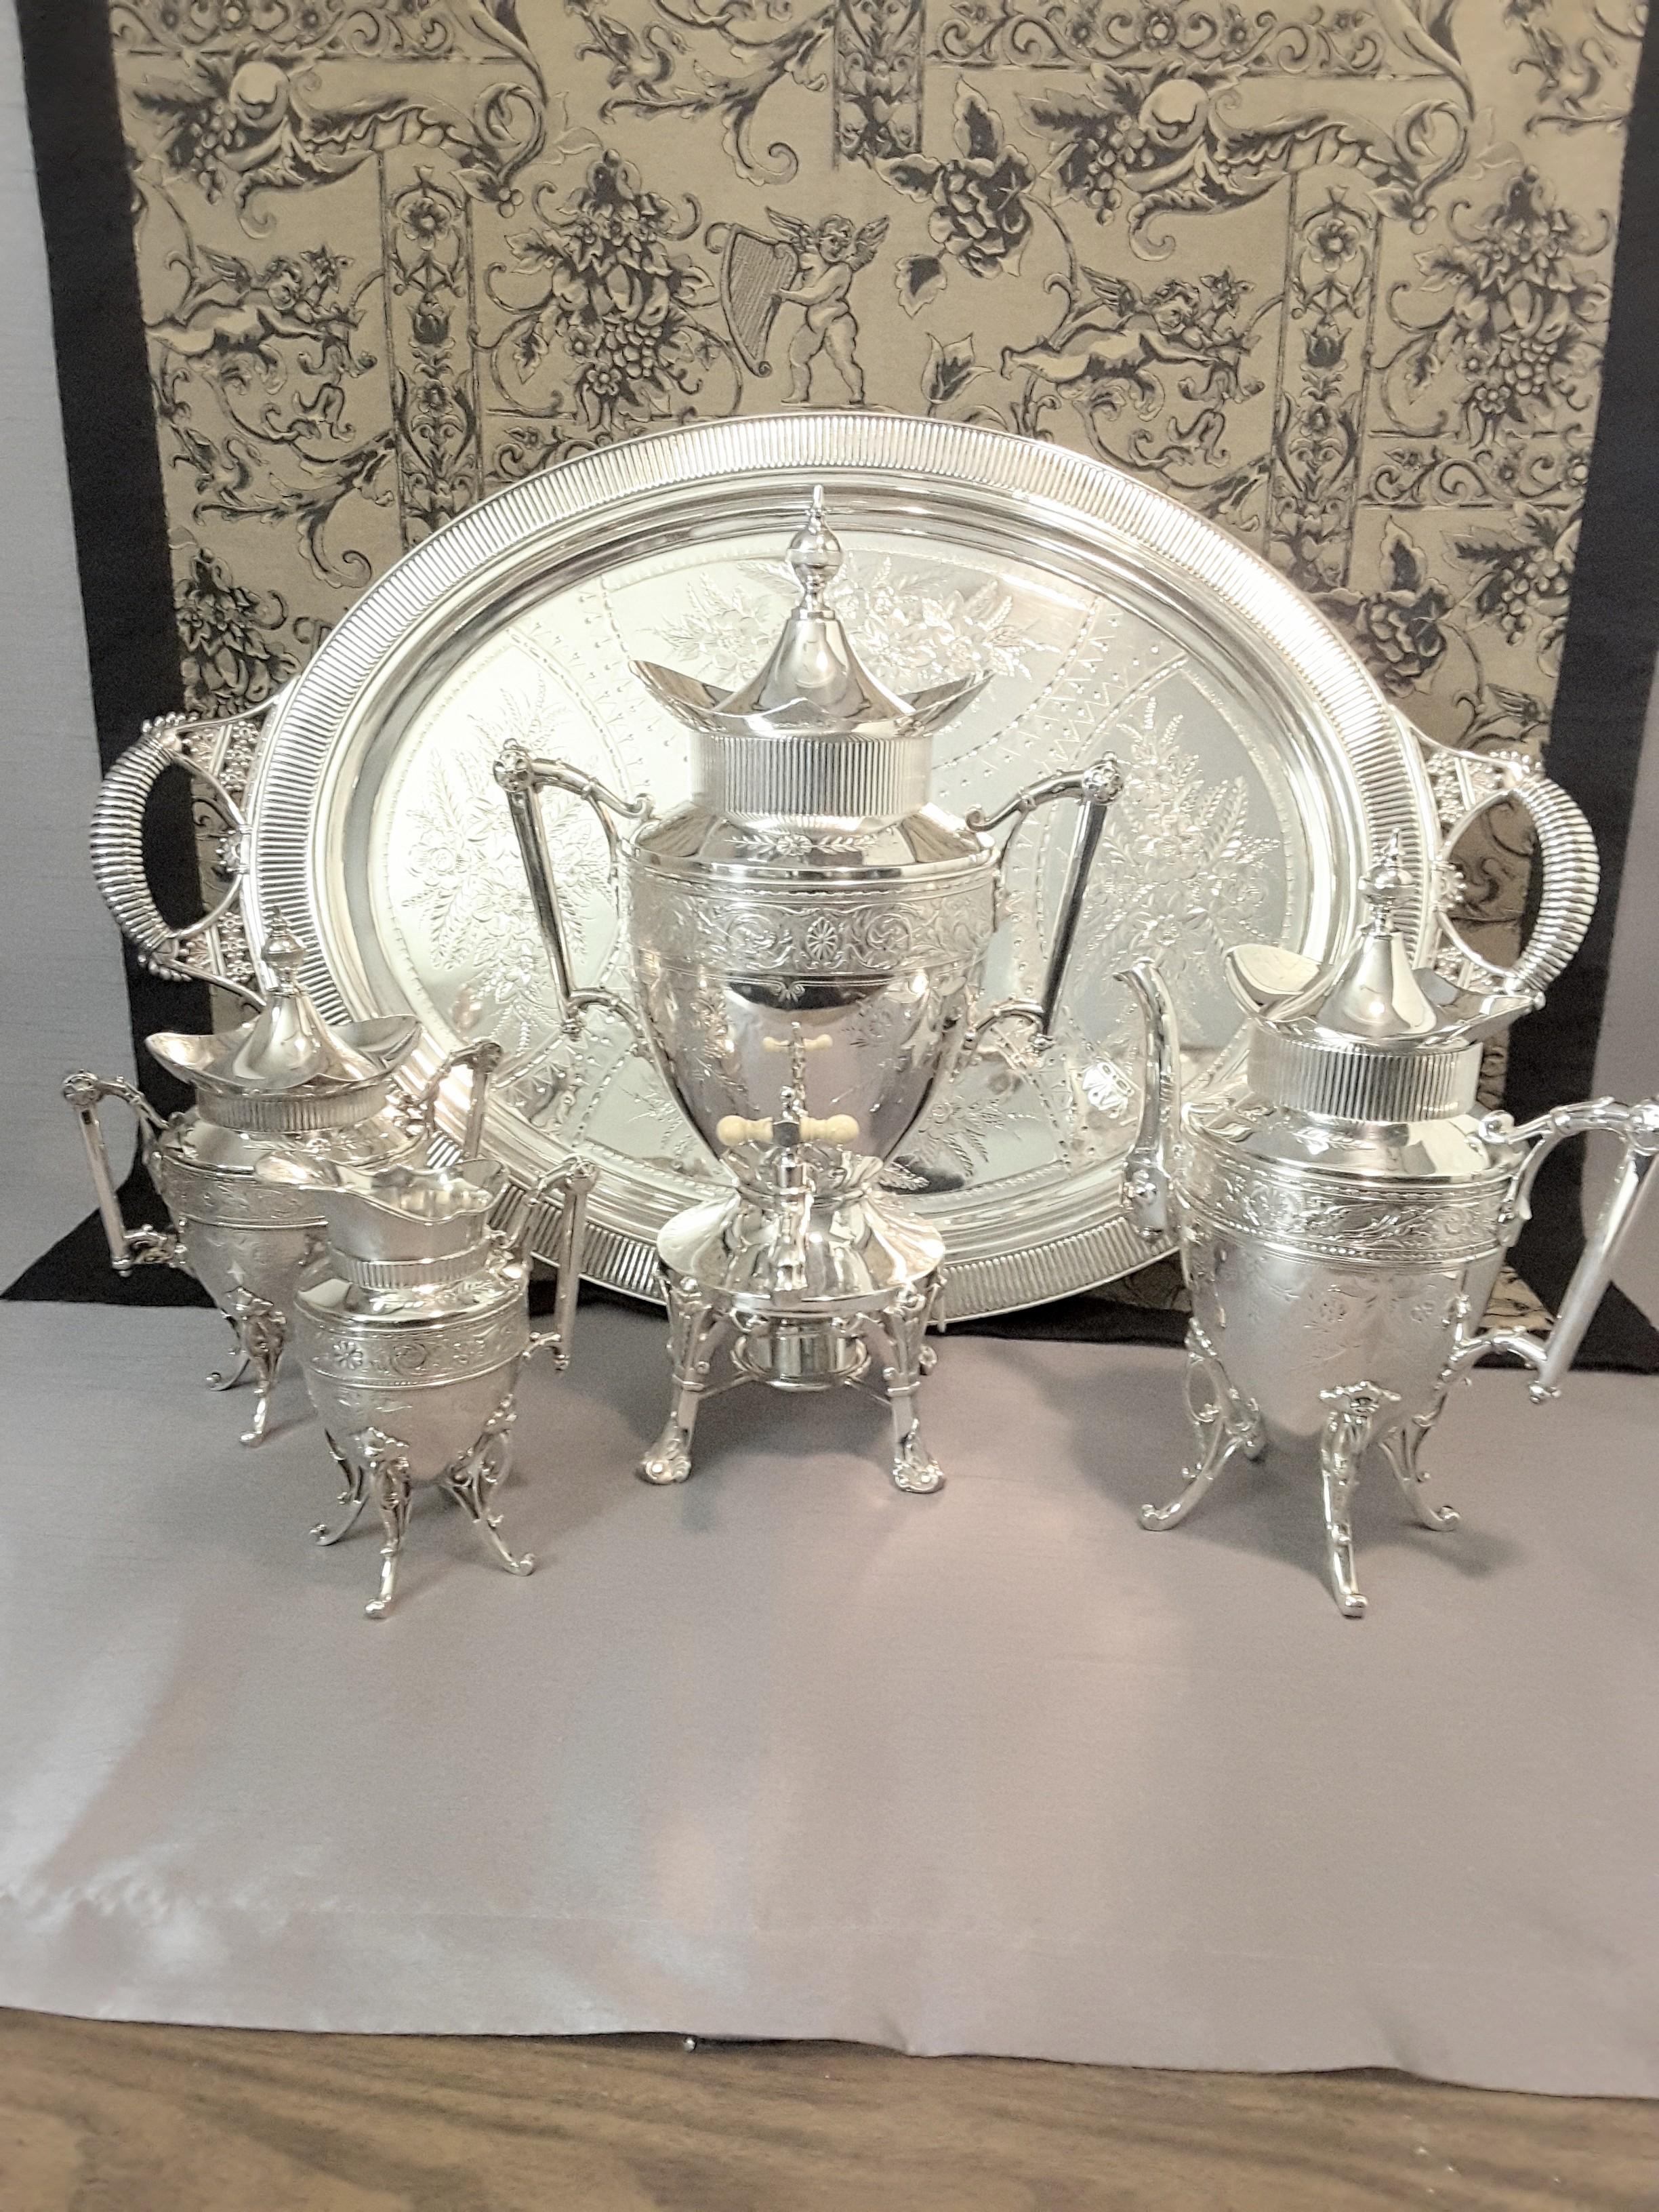 Exquisite Aesthetic Movement Silverplated Tea Service by Simpson, Hall & Miller For Sale 12